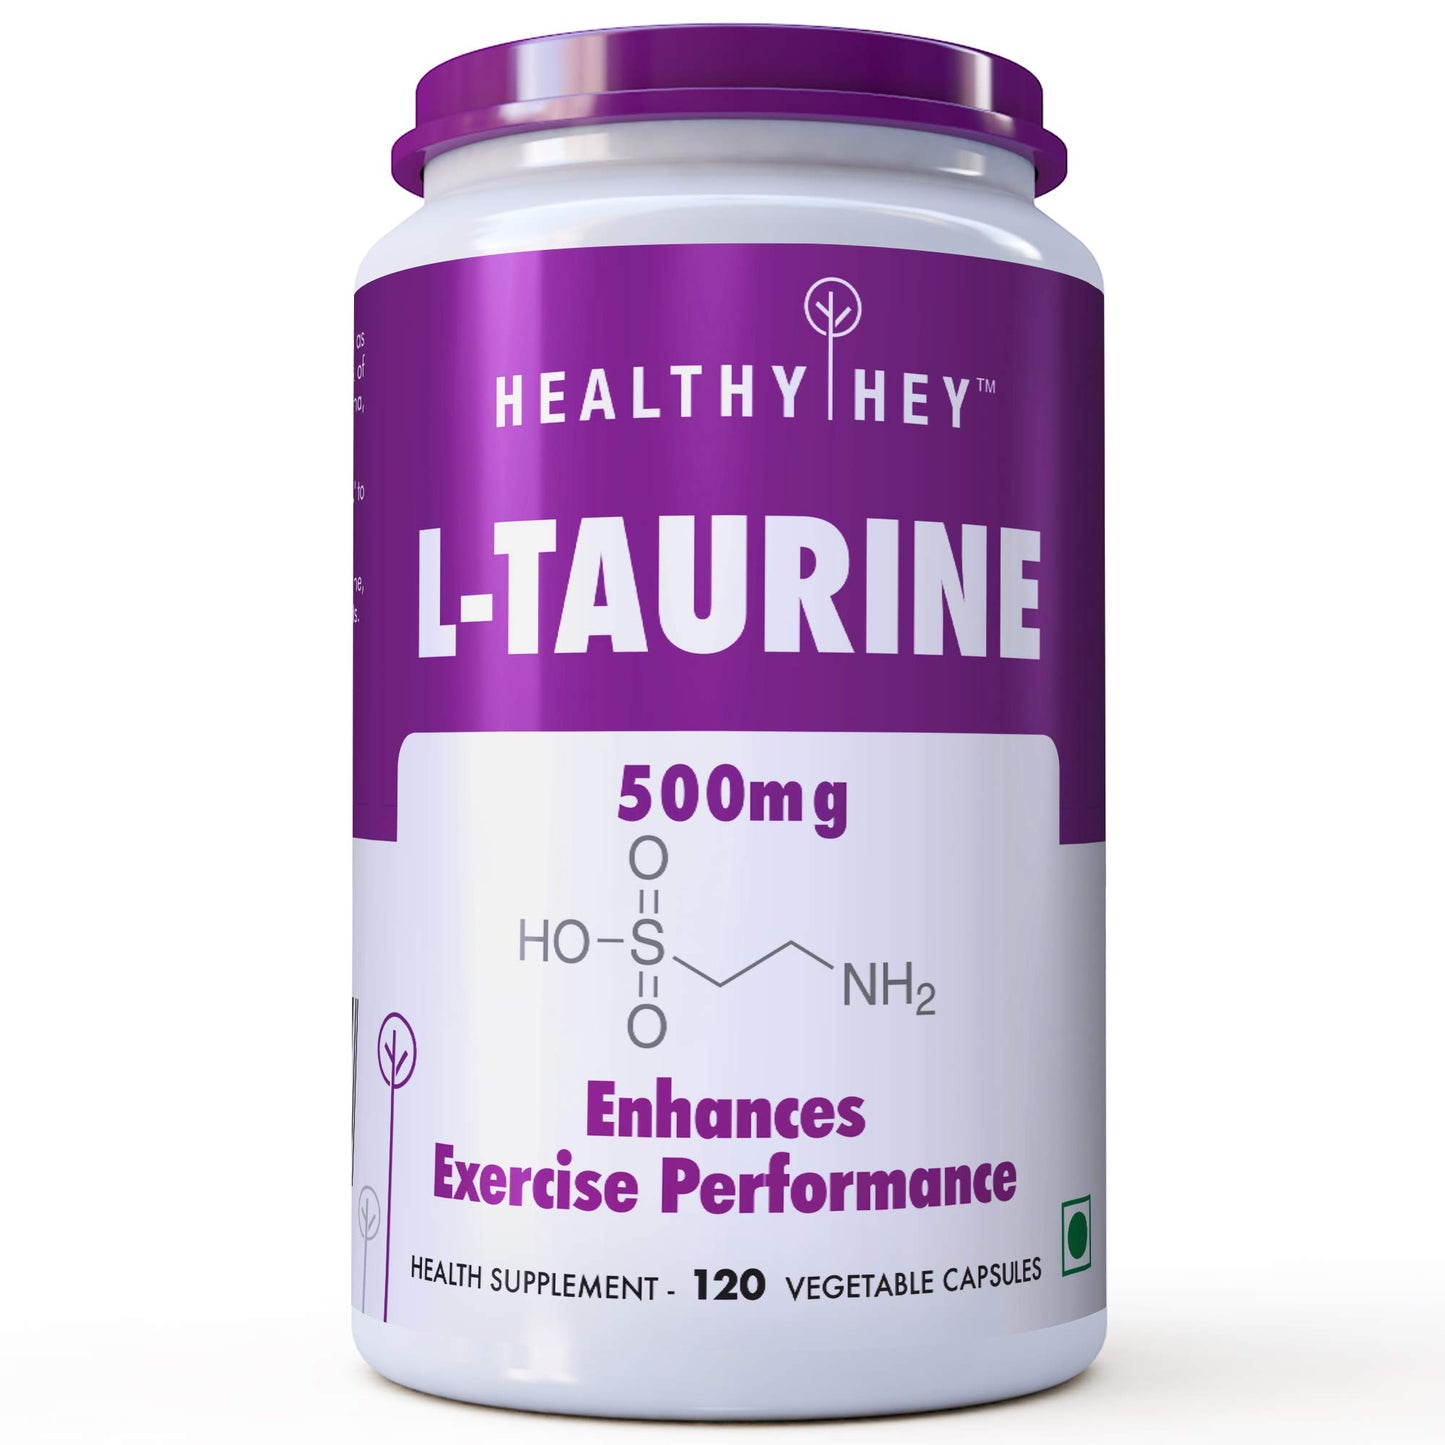 HealthyHey Nutrition L-Taurine (500 mg) Amino Acid Supplement -120 Vegetable Capsules